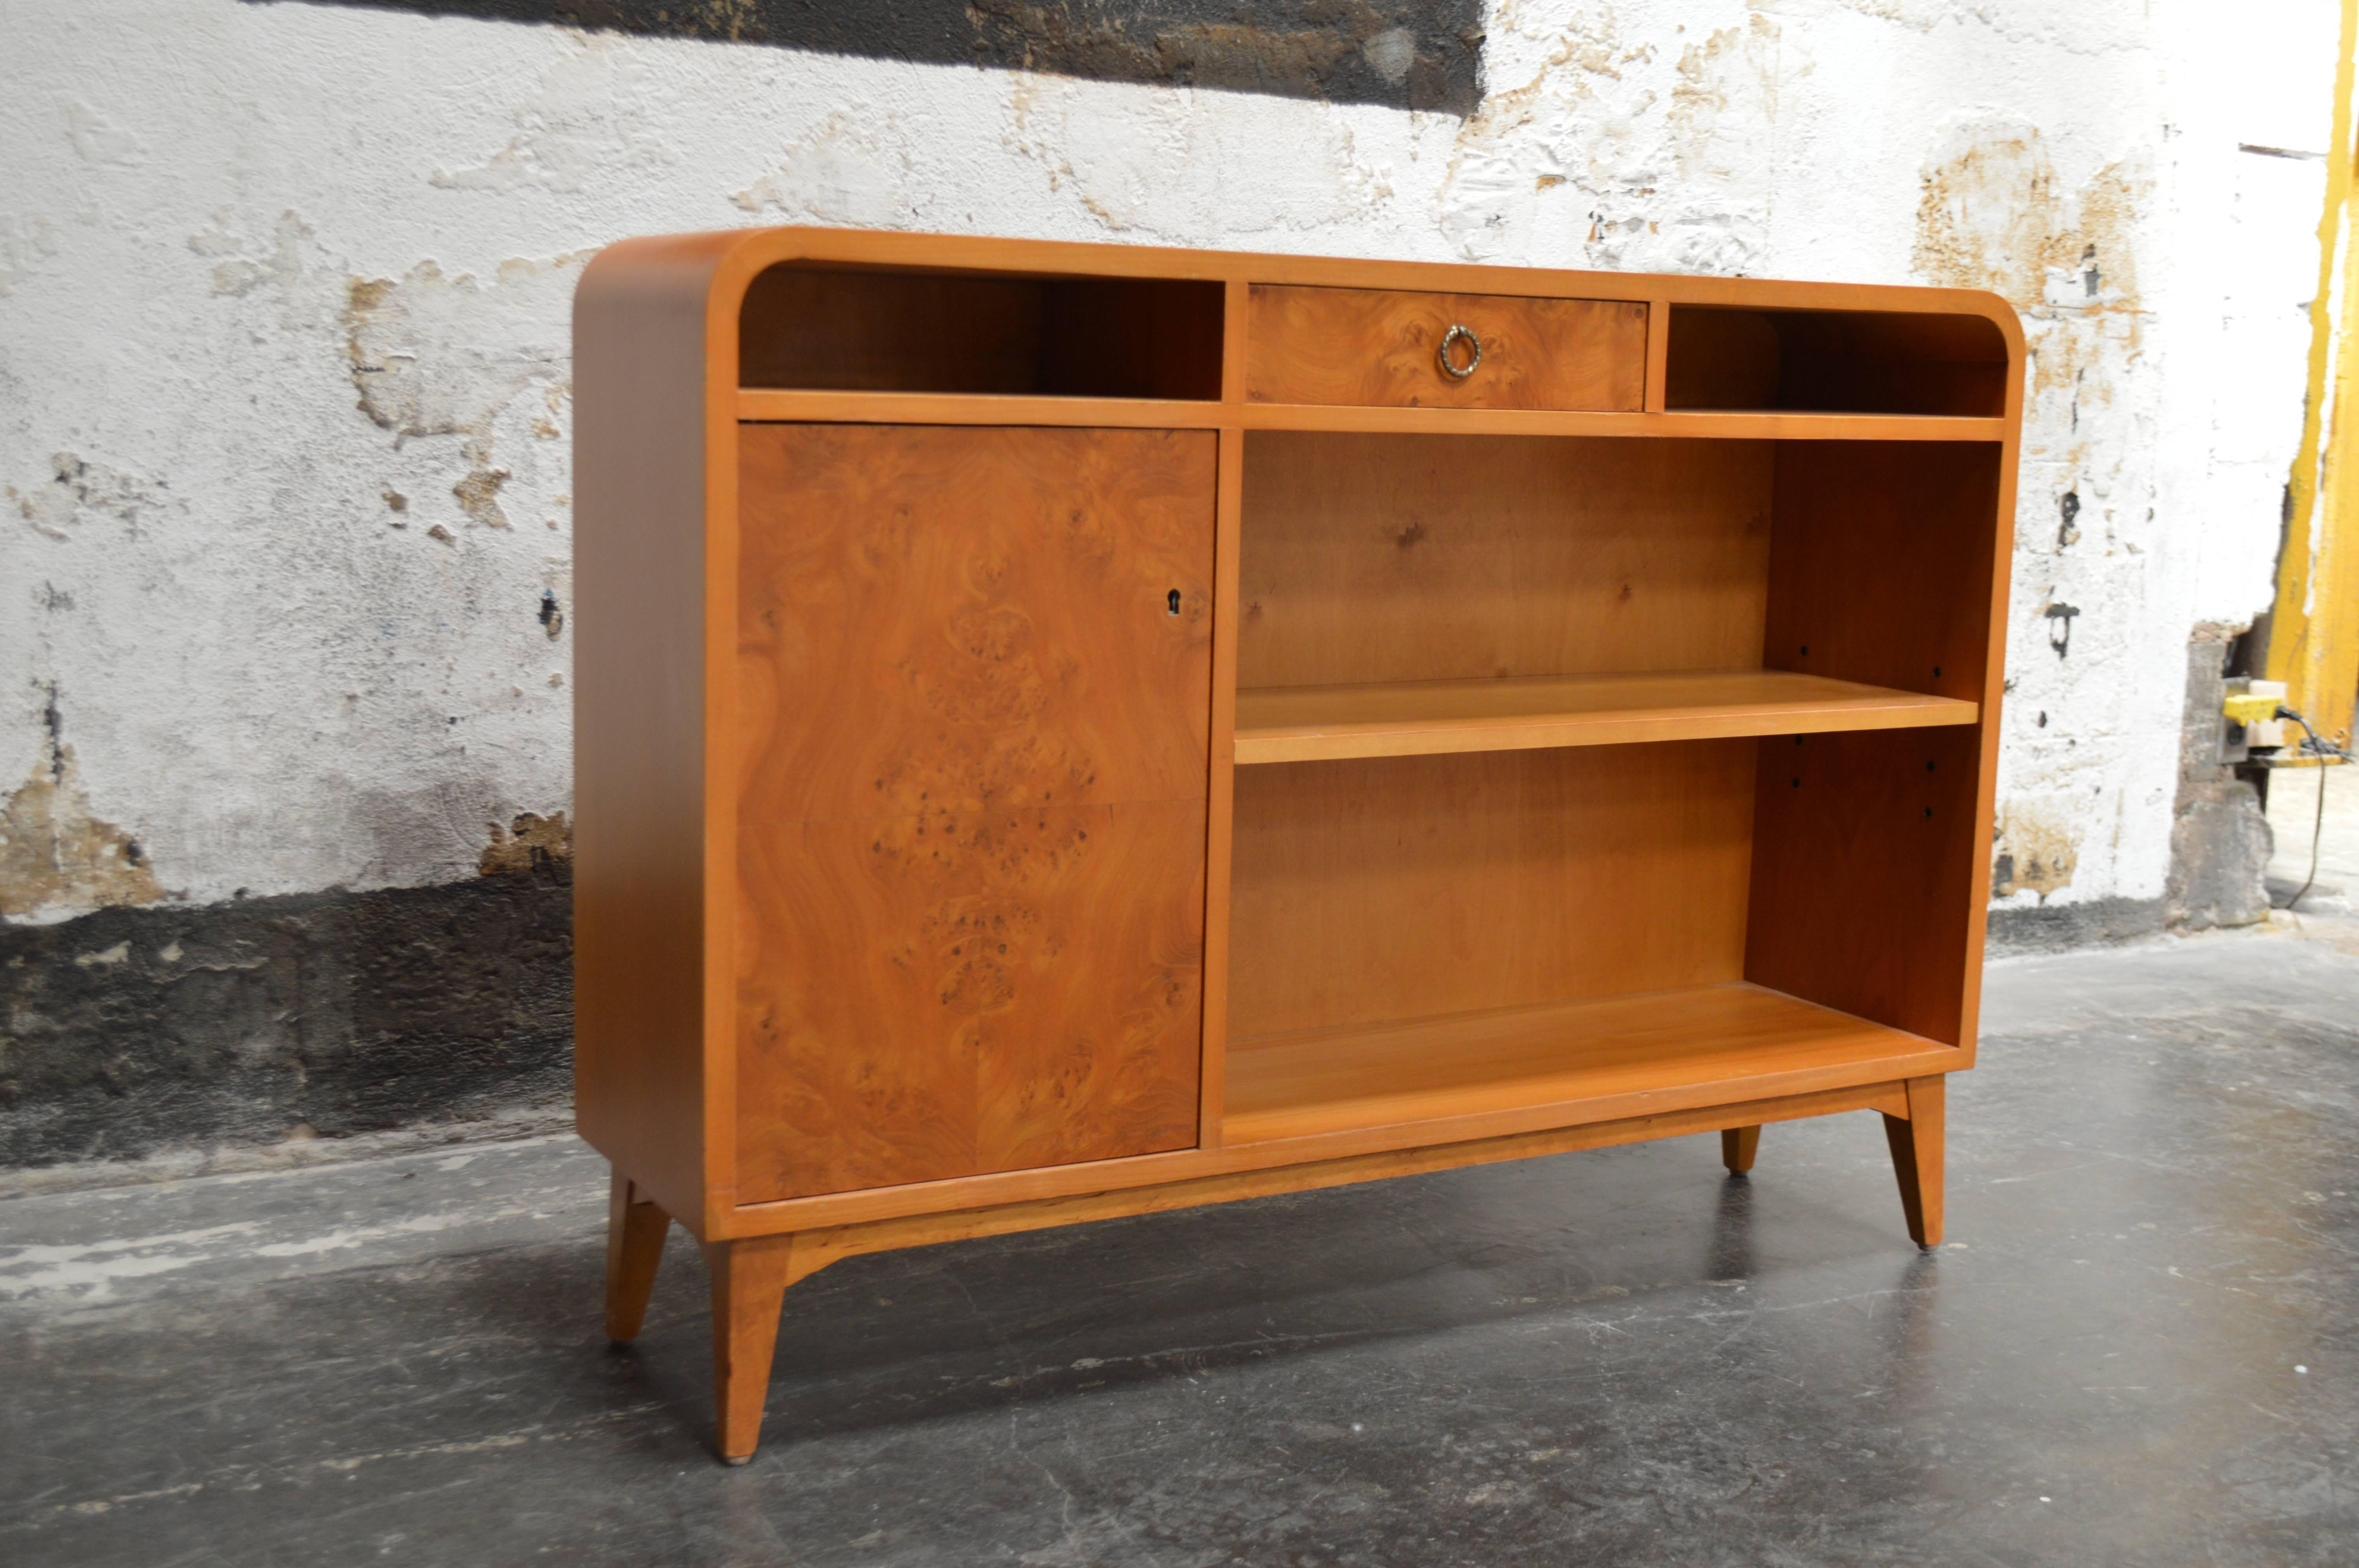 Mid-Century or Art Moderne bookcase was cabinet crafted of native golden elm with Carpathian elm door and drawer. This gorgeous wood has mellowed to a rich amber color. Adjustable shelves. Key included. Perfect as a slim console or stand for a flat